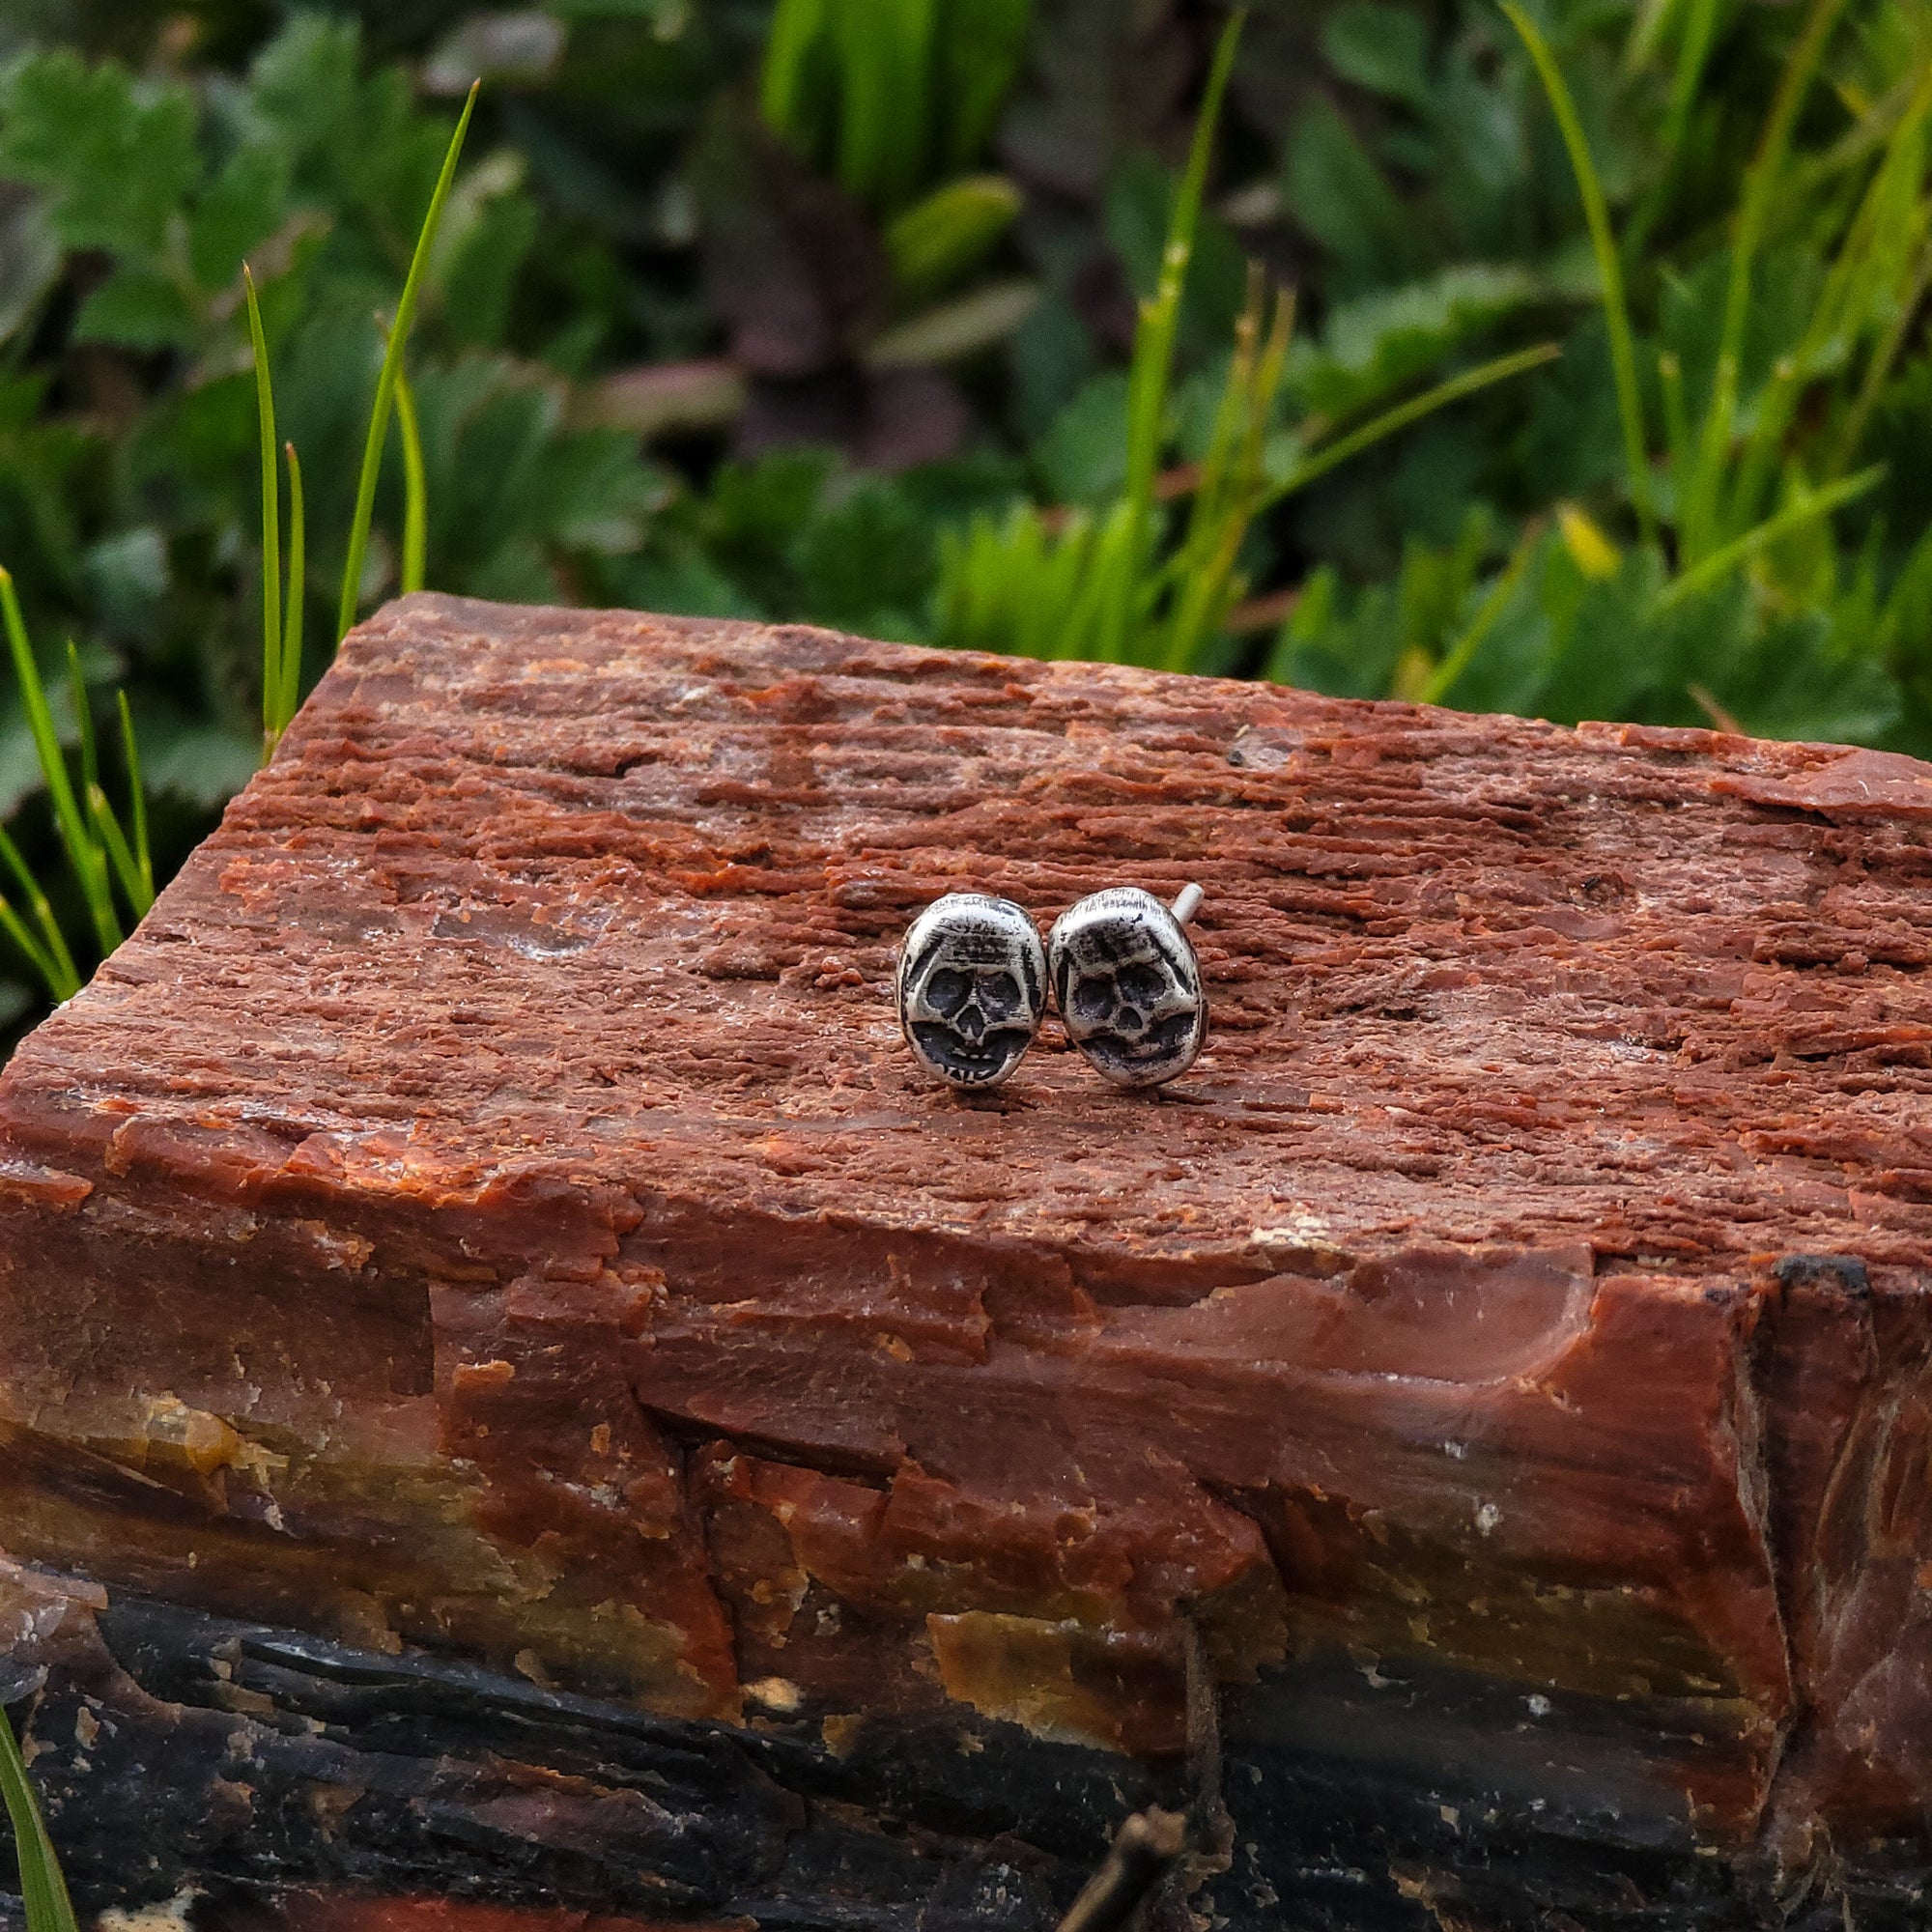 A pair of handmade sterling silver stud earrings in the shape of skulls are displayed on a piece of wood. In the background, there are lush green leaves. The intricate details of the skull design are bold and edgy.